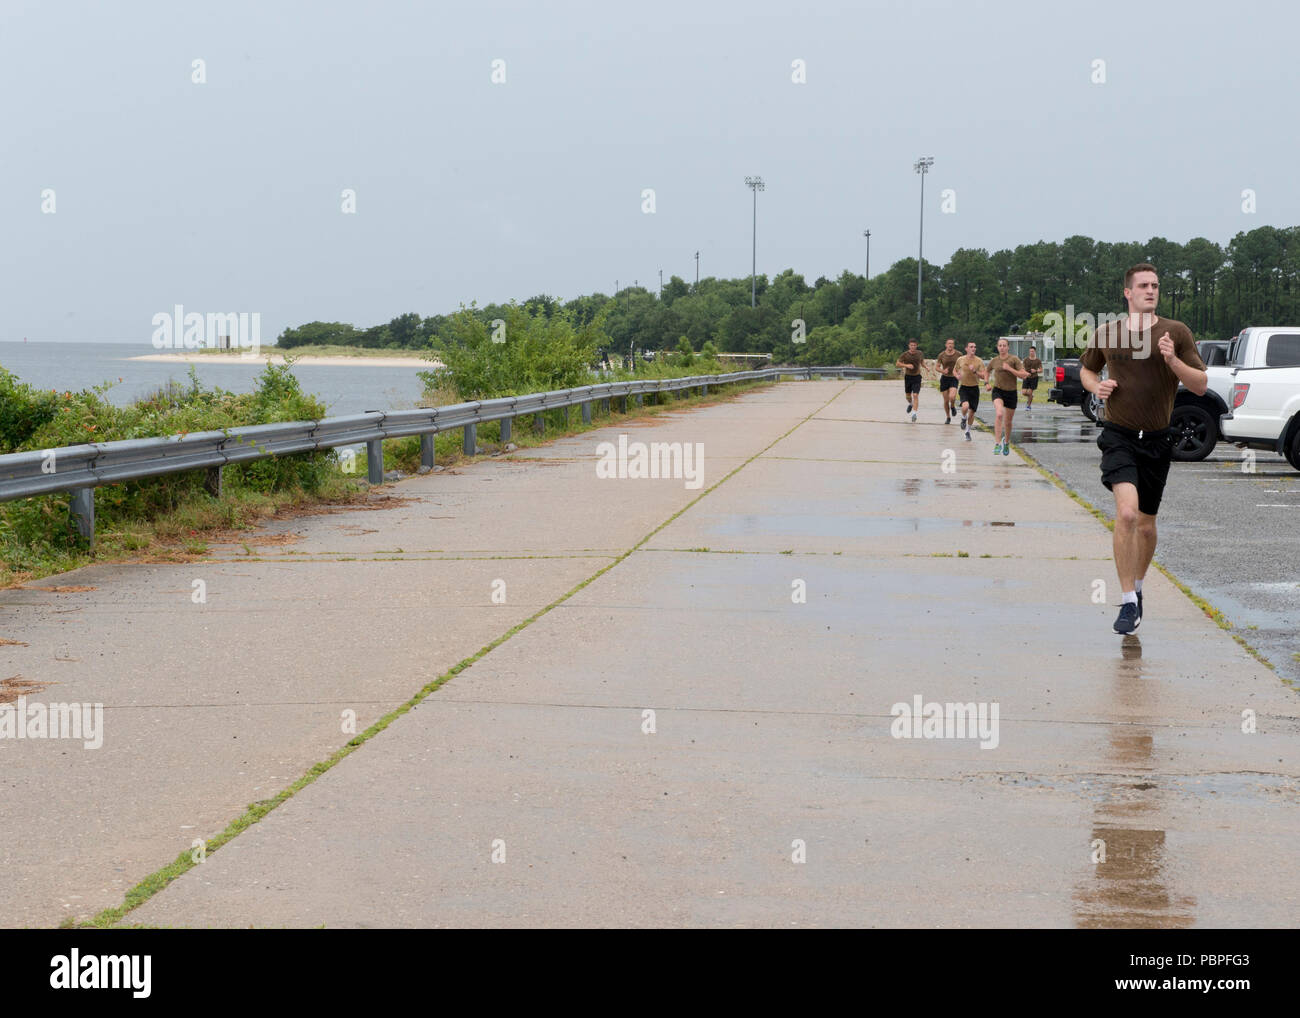 VIRGINIA BEACH, Va. (July 23, 2018) Midshipman 1st Class Ian Burgoyne, front, a U.S. Naval Academy midshipman, participates in the 1.5 mile run portion of a physical screening test (PST) as part of an explosive ordnance disposal summer cruise at Explosive Ordnance Disposal Group (EODGRU) 2 at Joint Expeditionary Base Little Creek-Fort Story. EODGRU 2 hosts the event to identify potential EOD officers from Naval Reserve Officers Training Corps and the U.S. Naval Academy prior to their senior year. (U.S. Navy photo by Mass Communication Specialist 1st Class Jeff Atherton/Released) Stock Photo